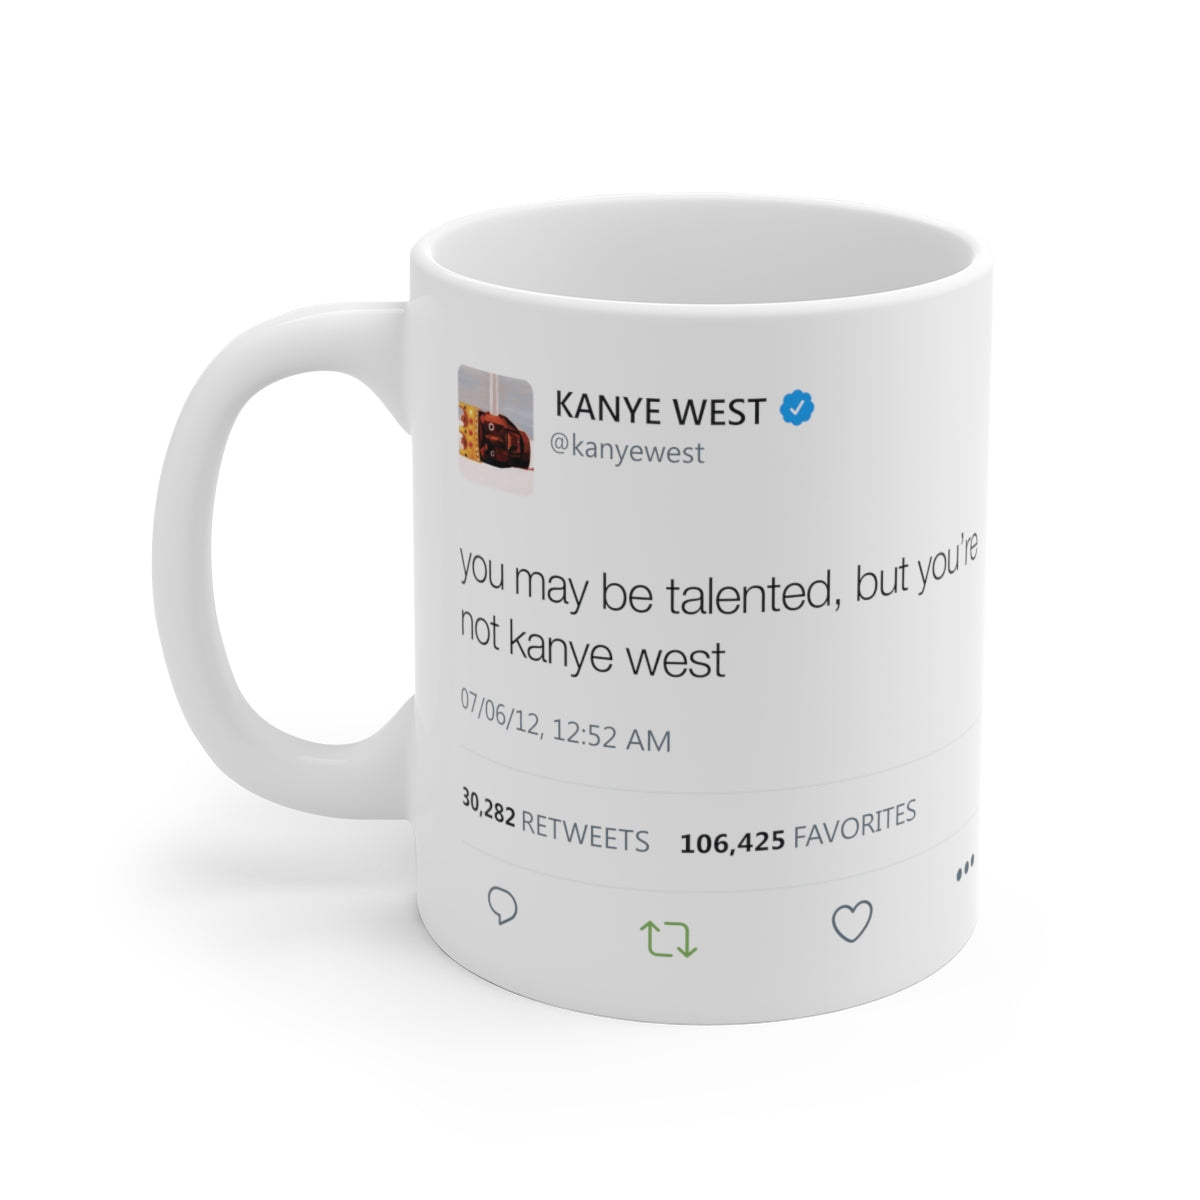 You may be talented, but you are not Kanye West Tweet Mug-11oz-Archethype